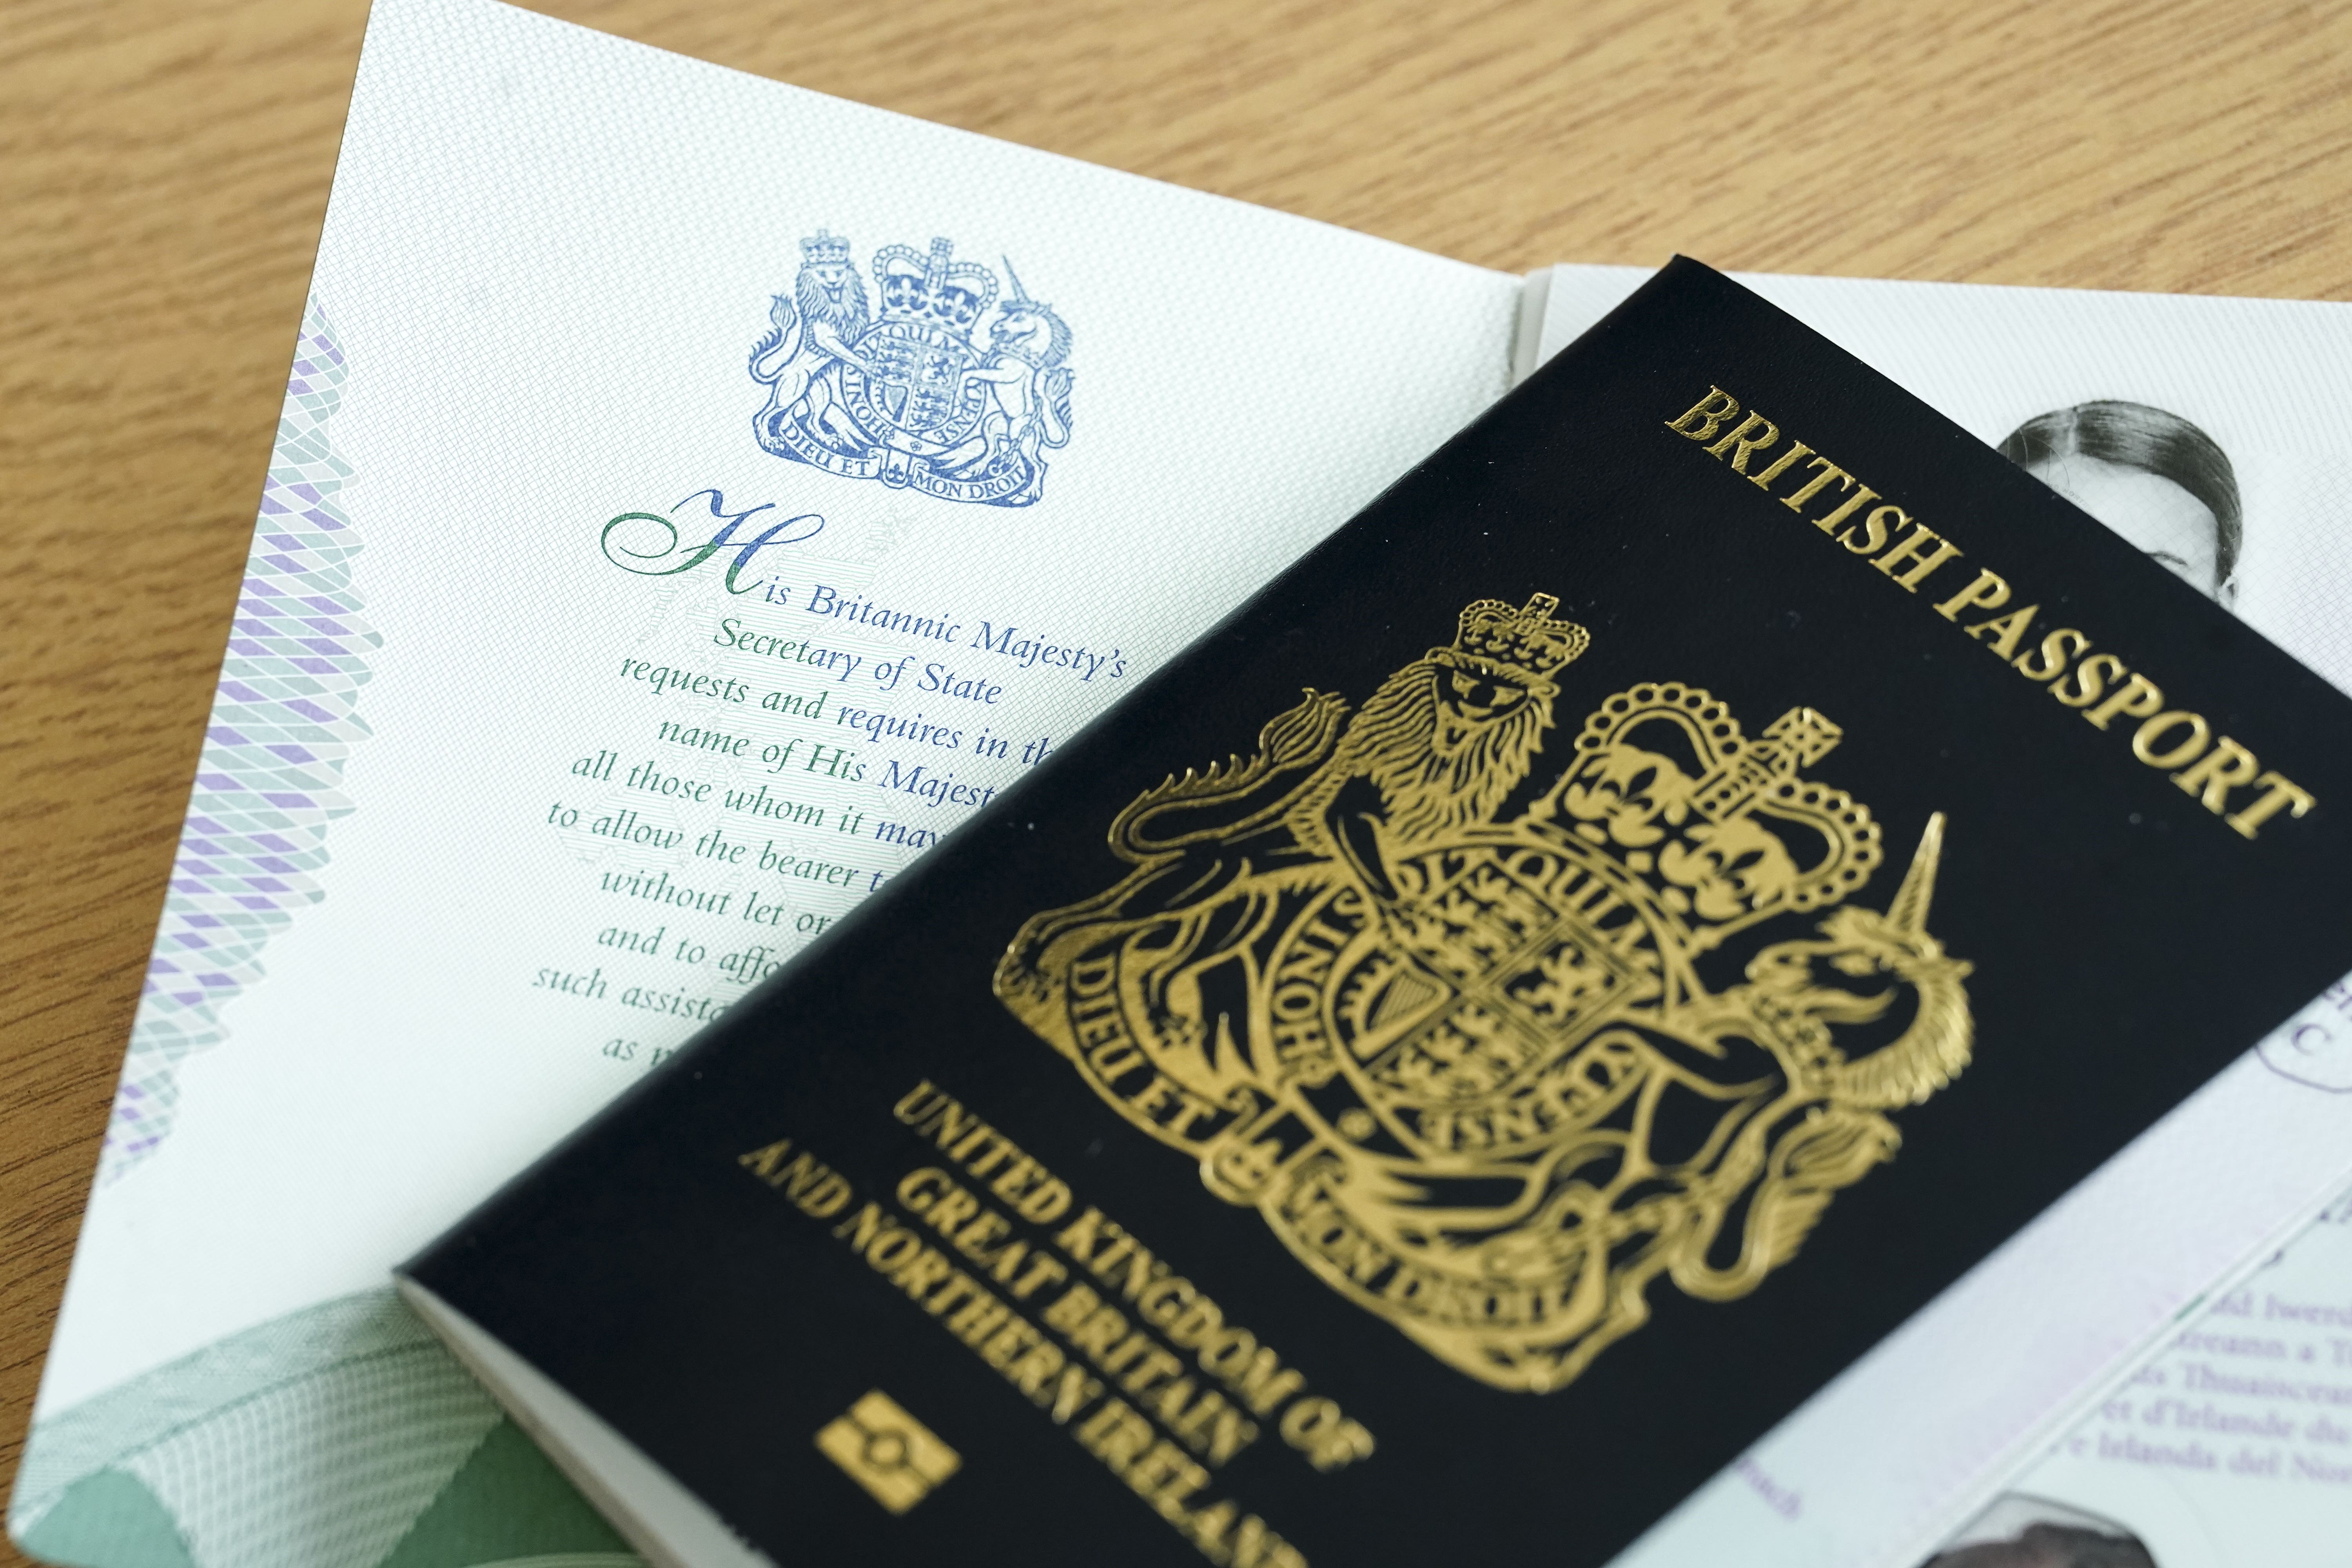 Passports that have sustained damaged may not be valid for travel